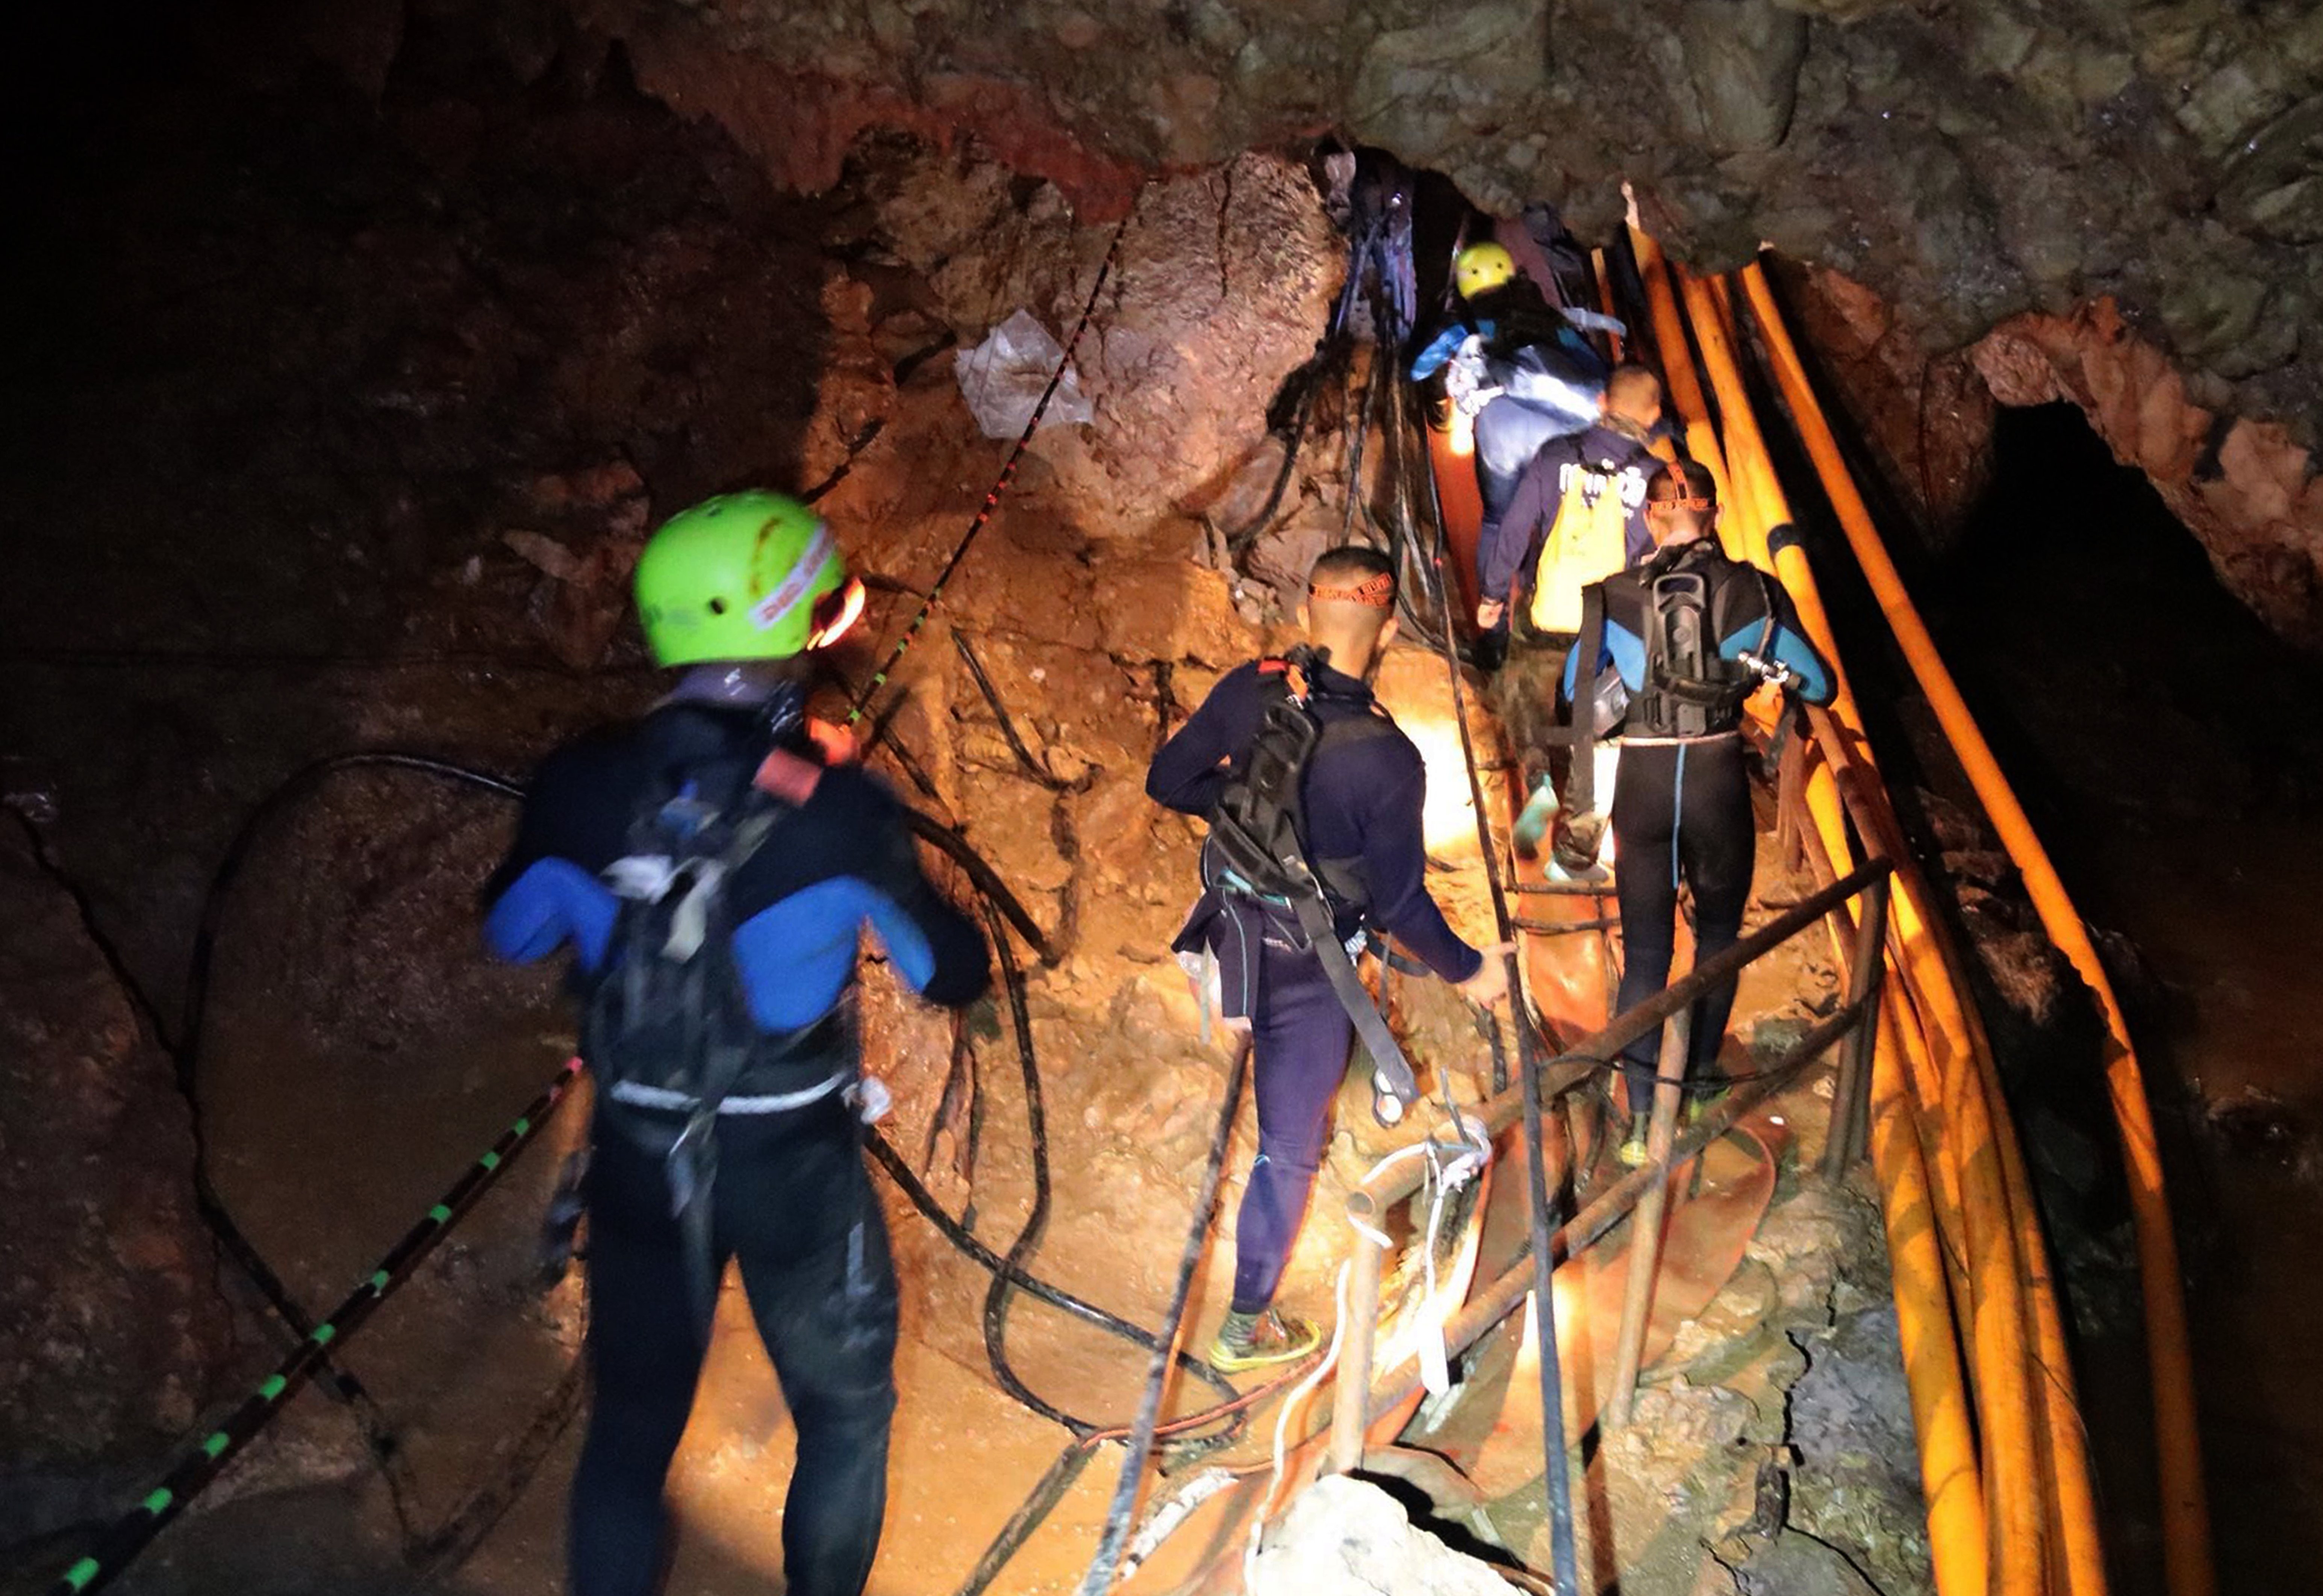 epa06870510 A handout photo made available by the Thai Royal Navy on 07 July 2018 shows Thai military personnel inside a cave complex during the ongoing rescue operations for the youth soccer team and their assistant coach, at Tham Luang cave in Khun Nam Nang Non Forest Park, Chiang Rai province, Thailand. Operations are underway to safely bring out the 13 members of youth soccer team including their assistant coach who have been trapped in Tham Luang cave since 23 June 2018.  EPA/ROYAL THAI NAVY / HANDOUT  HANDOUT EDITORIAL USE ONLY/NO SALES